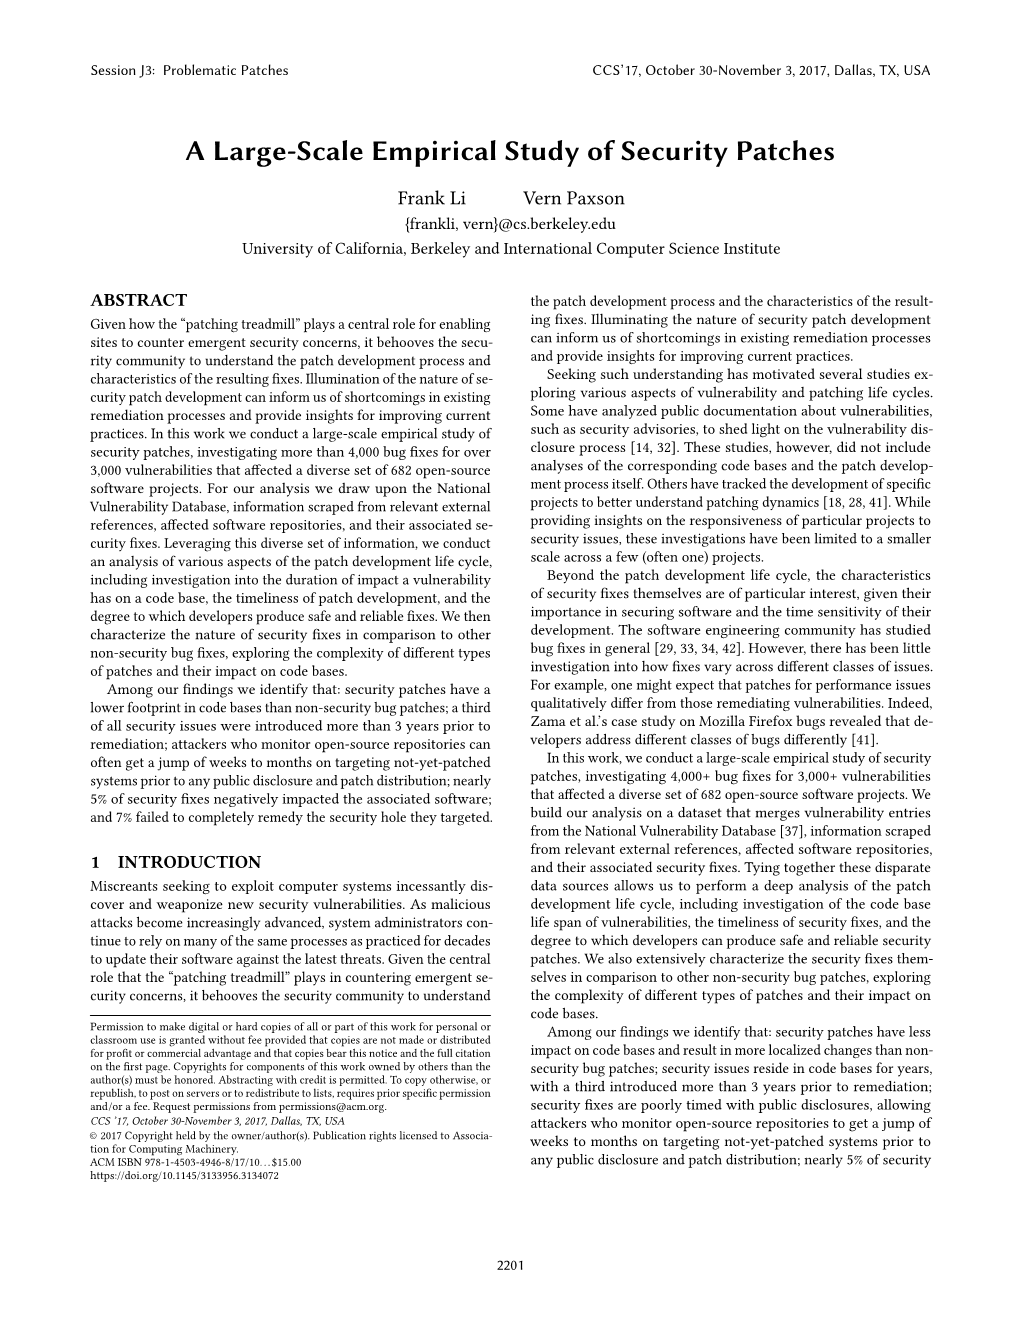 A Large-Scale Empirical Study of Security Patches